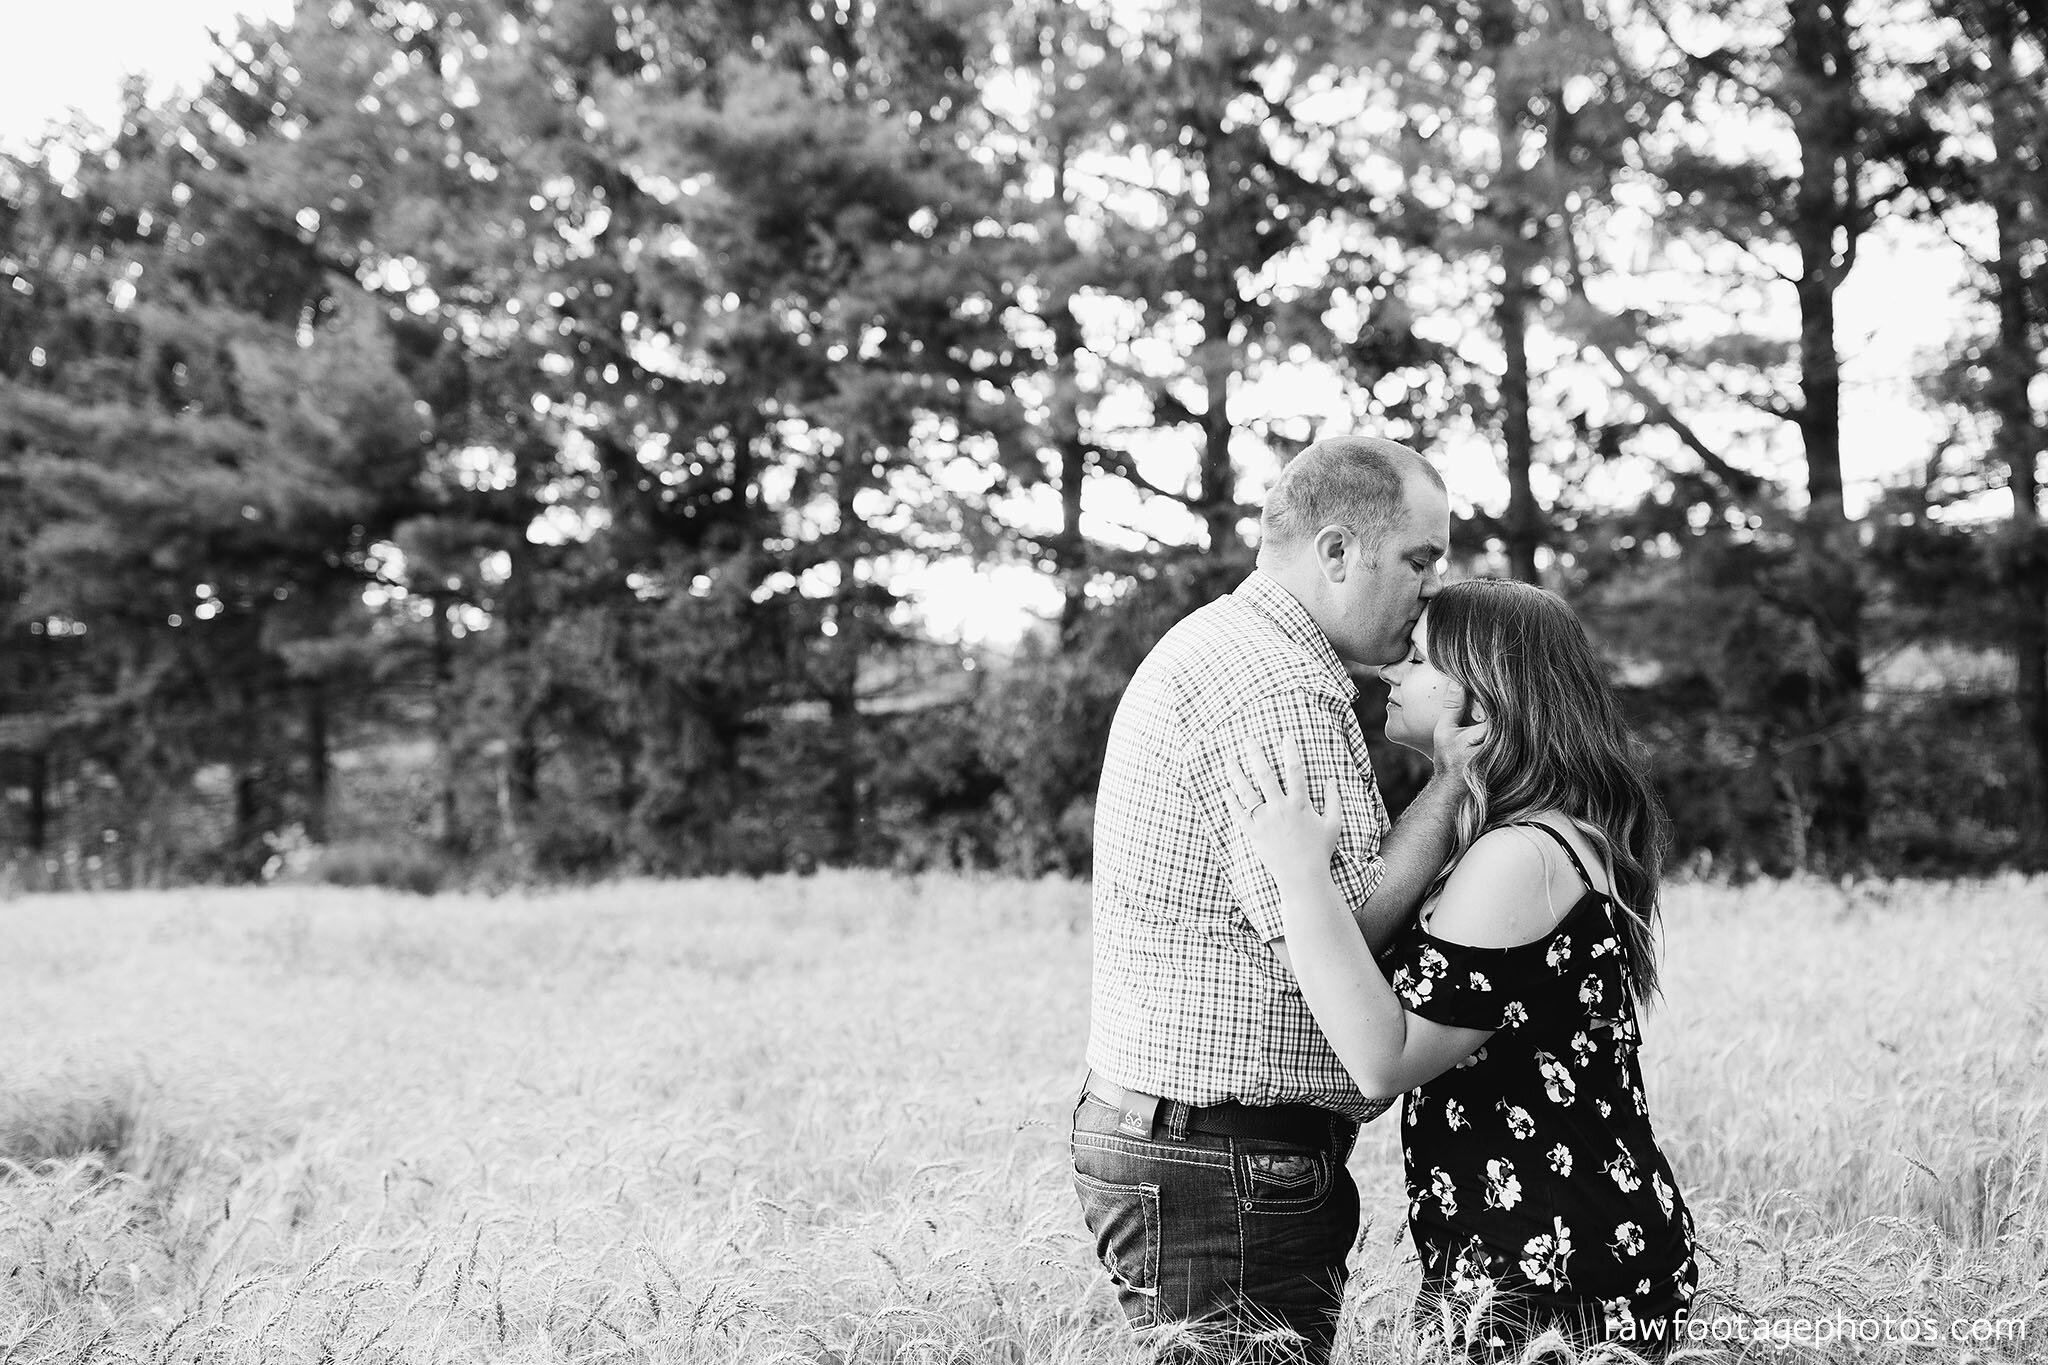 london_ontario_wedding_photographer-engagement_session-farm_engagement-country_e_session-raw_footage_photography-corn_field-014.jpg